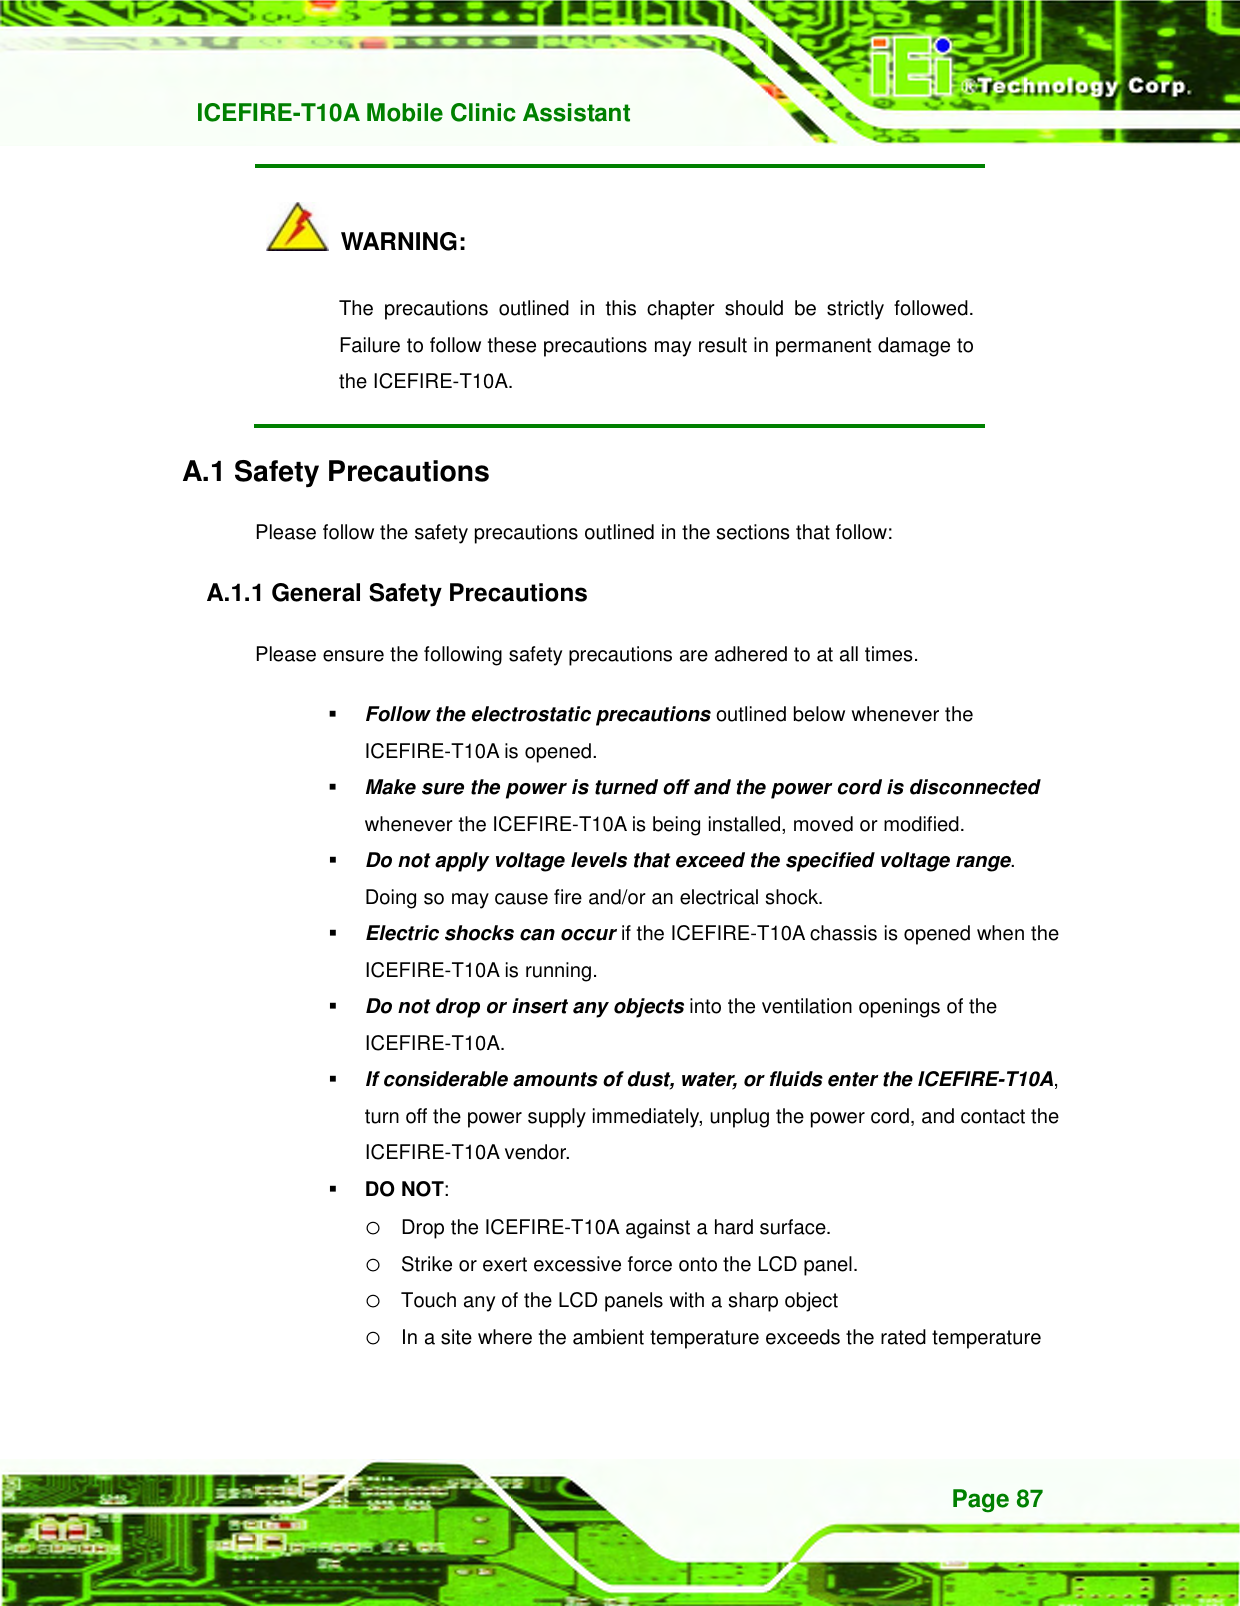   ICEFIRE-T10A Mobile Clinic Assistant Page 87   WARNING: The  precautions  outlined  in  this  chapter  should  be  strictly  followed. Failure to follow these precautions may result in permanent damage to the ICEFIRE-T10A. A.1 Safety Precautions Please follow the safety precautions outlined in the sections that follow: A.1.1 General Safety Precautions Please ensure the following safety precautions are adhered to at all times.  Follow the electrostatic precautions outlined below whenever the ICEFIRE-T10A is opened.  Make sure the power is turned off and the power cord is disconnected whenever the ICEFIRE-T10A is being installed, moved or modified.    Do not apply voltage levels that exceed the specified voltage range. Doing so may cause fire and/or an electrical shock.  Electric shocks can occur if the ICEFIRE-T10A chassis is opened when the ICEFIRE-T10A is running.    Do not drop or insert any objects into the ventilation openings of the ICEFIRE-T10A.  If considerable amounts of dust, water, or fluids enter the ICEFIRE-T10A, turn off the power supply immediately, unplug the power cord, and contact the ICEFIRE-T10A vendor.    DO NOT:   o Drop the ICEFIRE-T10A against a hard surface. o Strike or exert excessive force onto the LCD panel. o Touch any of the LCD panels with a sharp object o In a site where the ambient temperature exceeds the rated temperature 